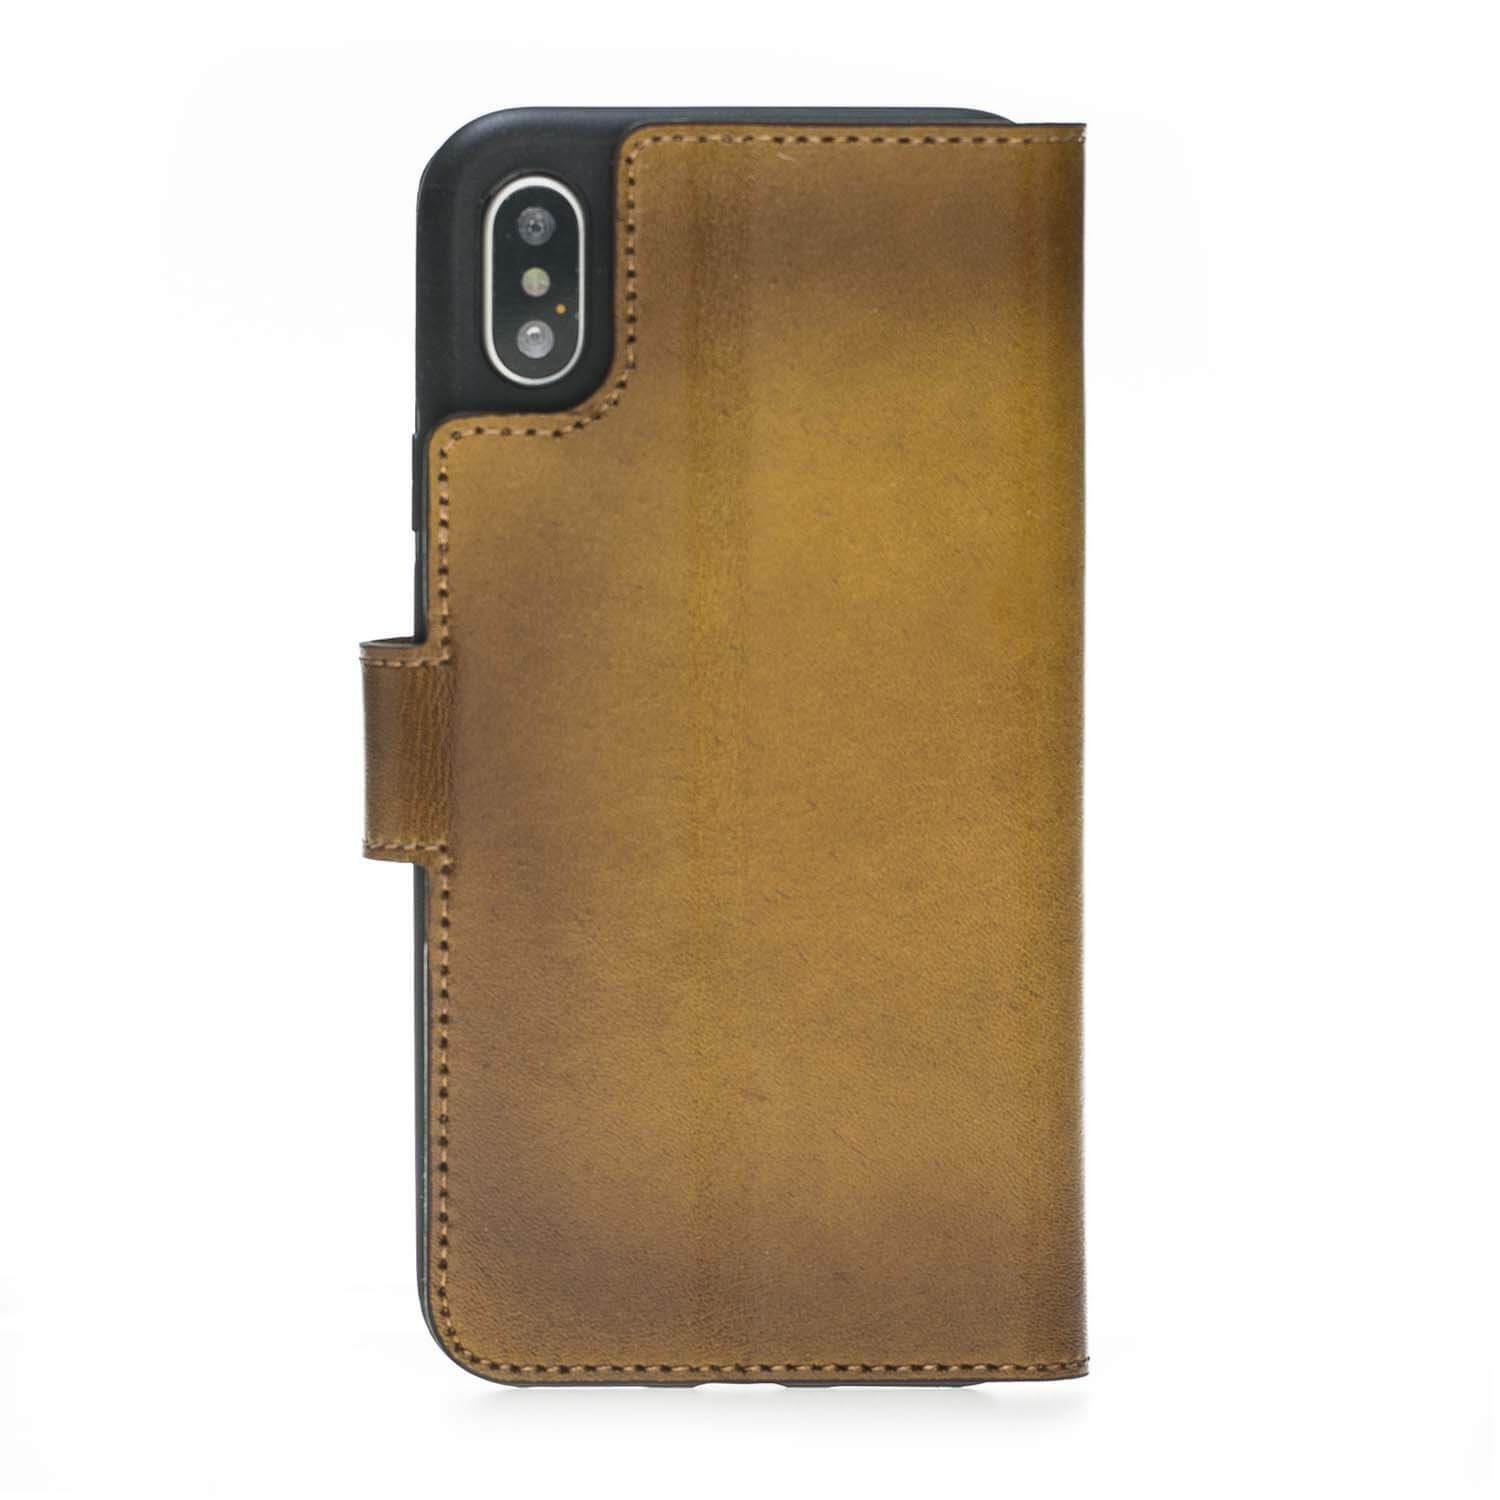 Wallet Folio Leather Case with ID slot for Apple iPhone X series